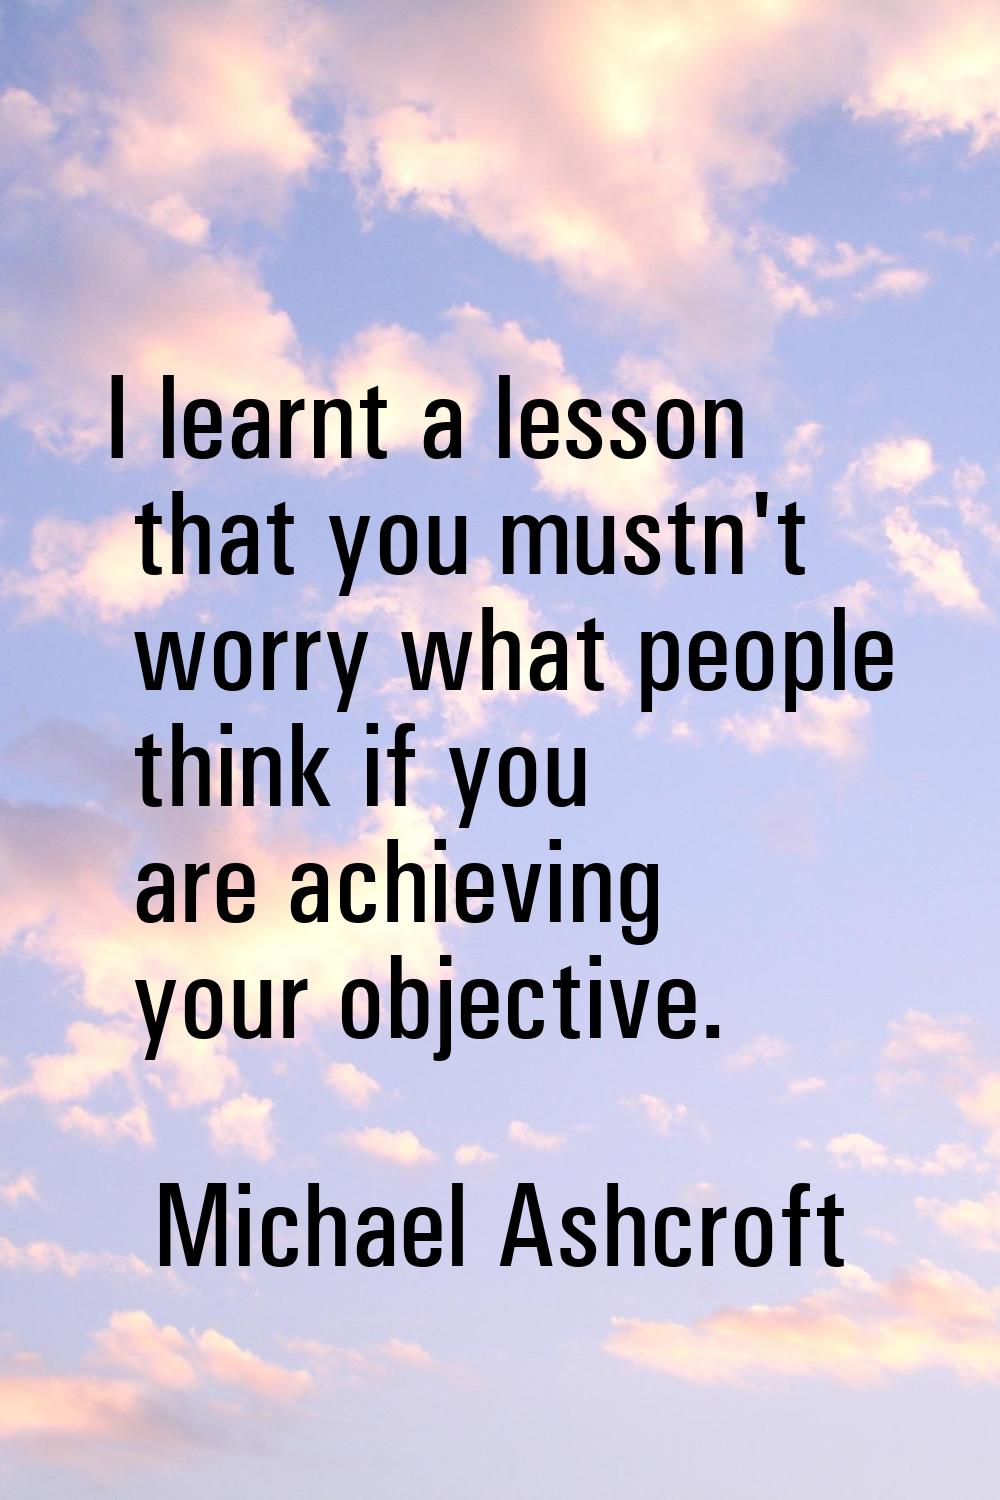 I learnt a lesson that you mustn't worry what people think if you are achieving your objective.